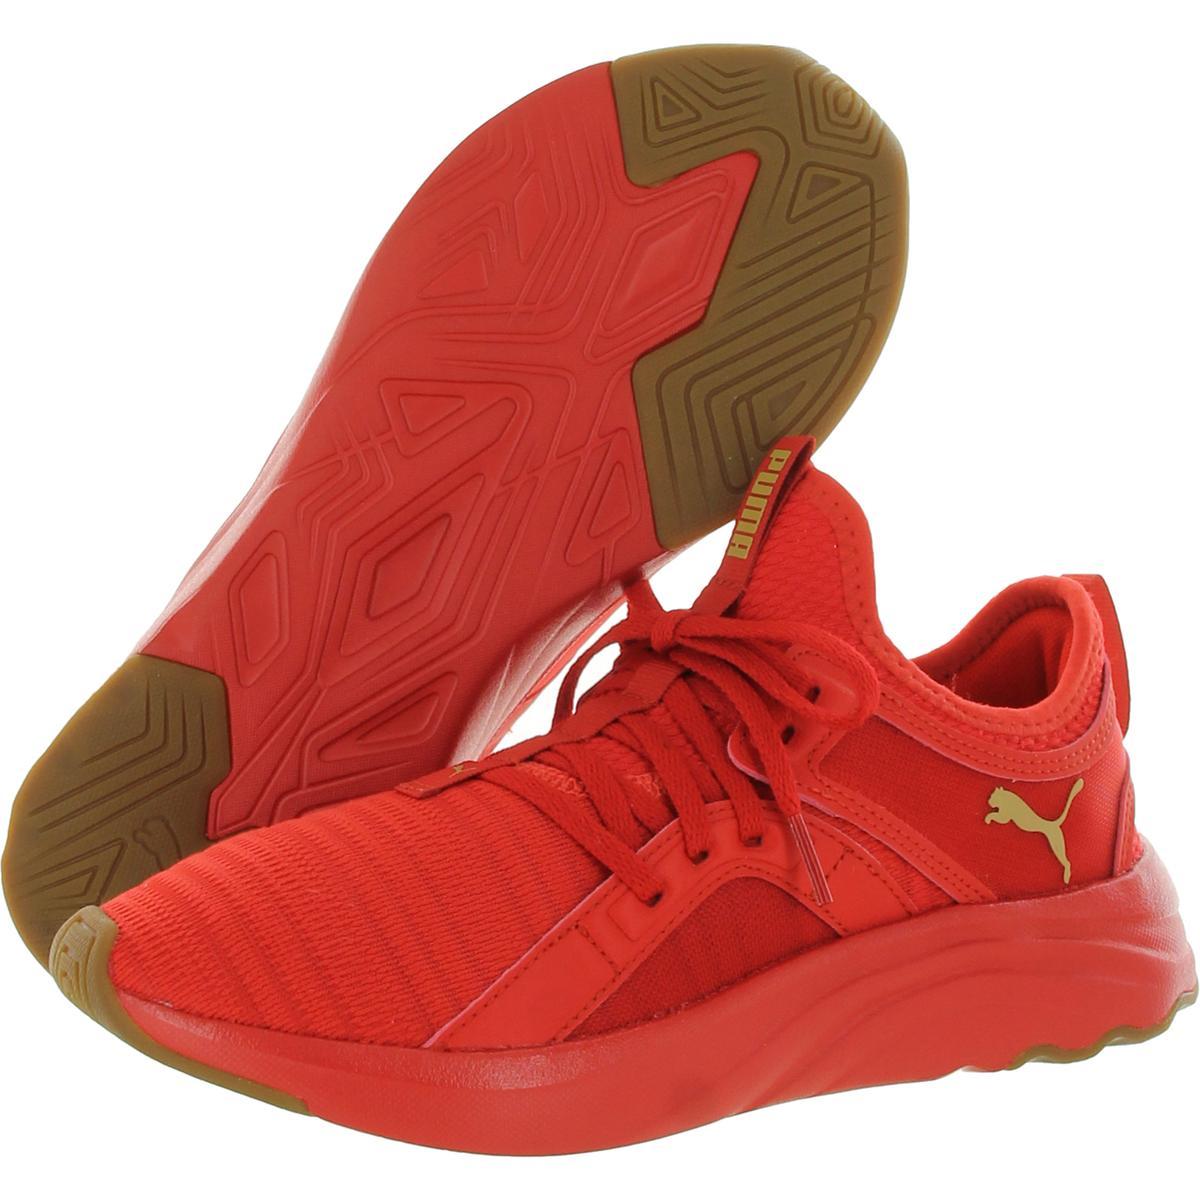 PUMA Softride Sophia Exercise Running Athletic And Training Shoes in Red |  Lyst